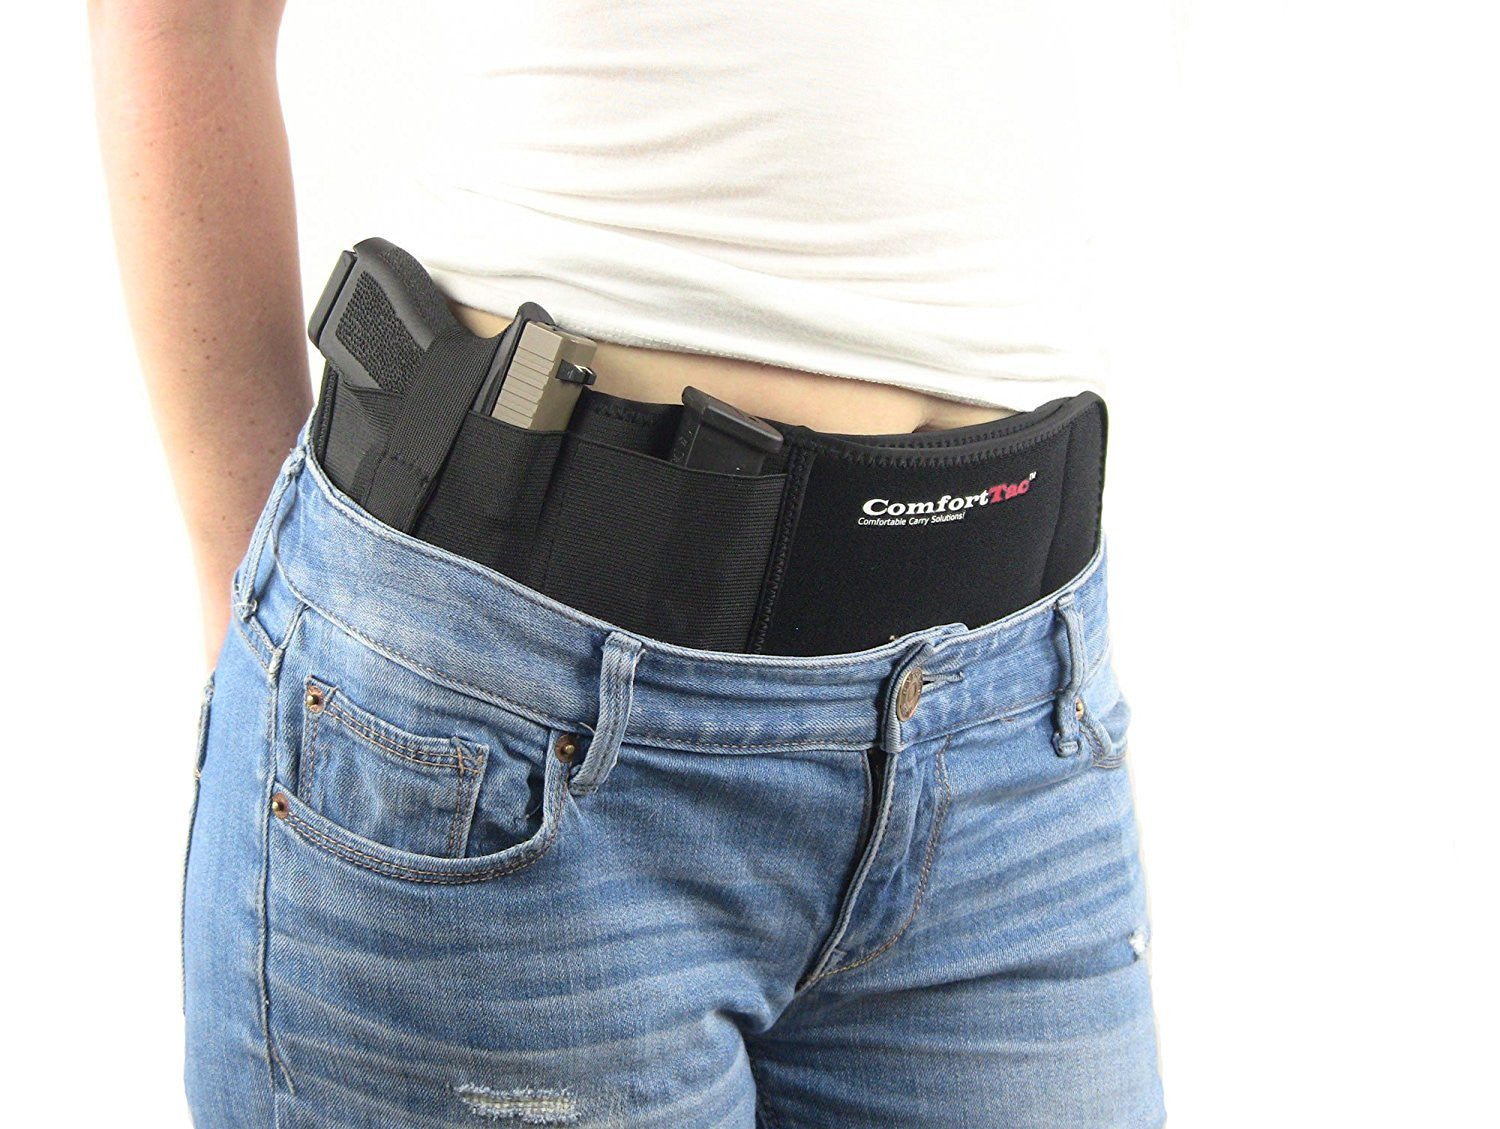 Tacticshub Belly Band Holster for Concealed Carry – Gun Holster